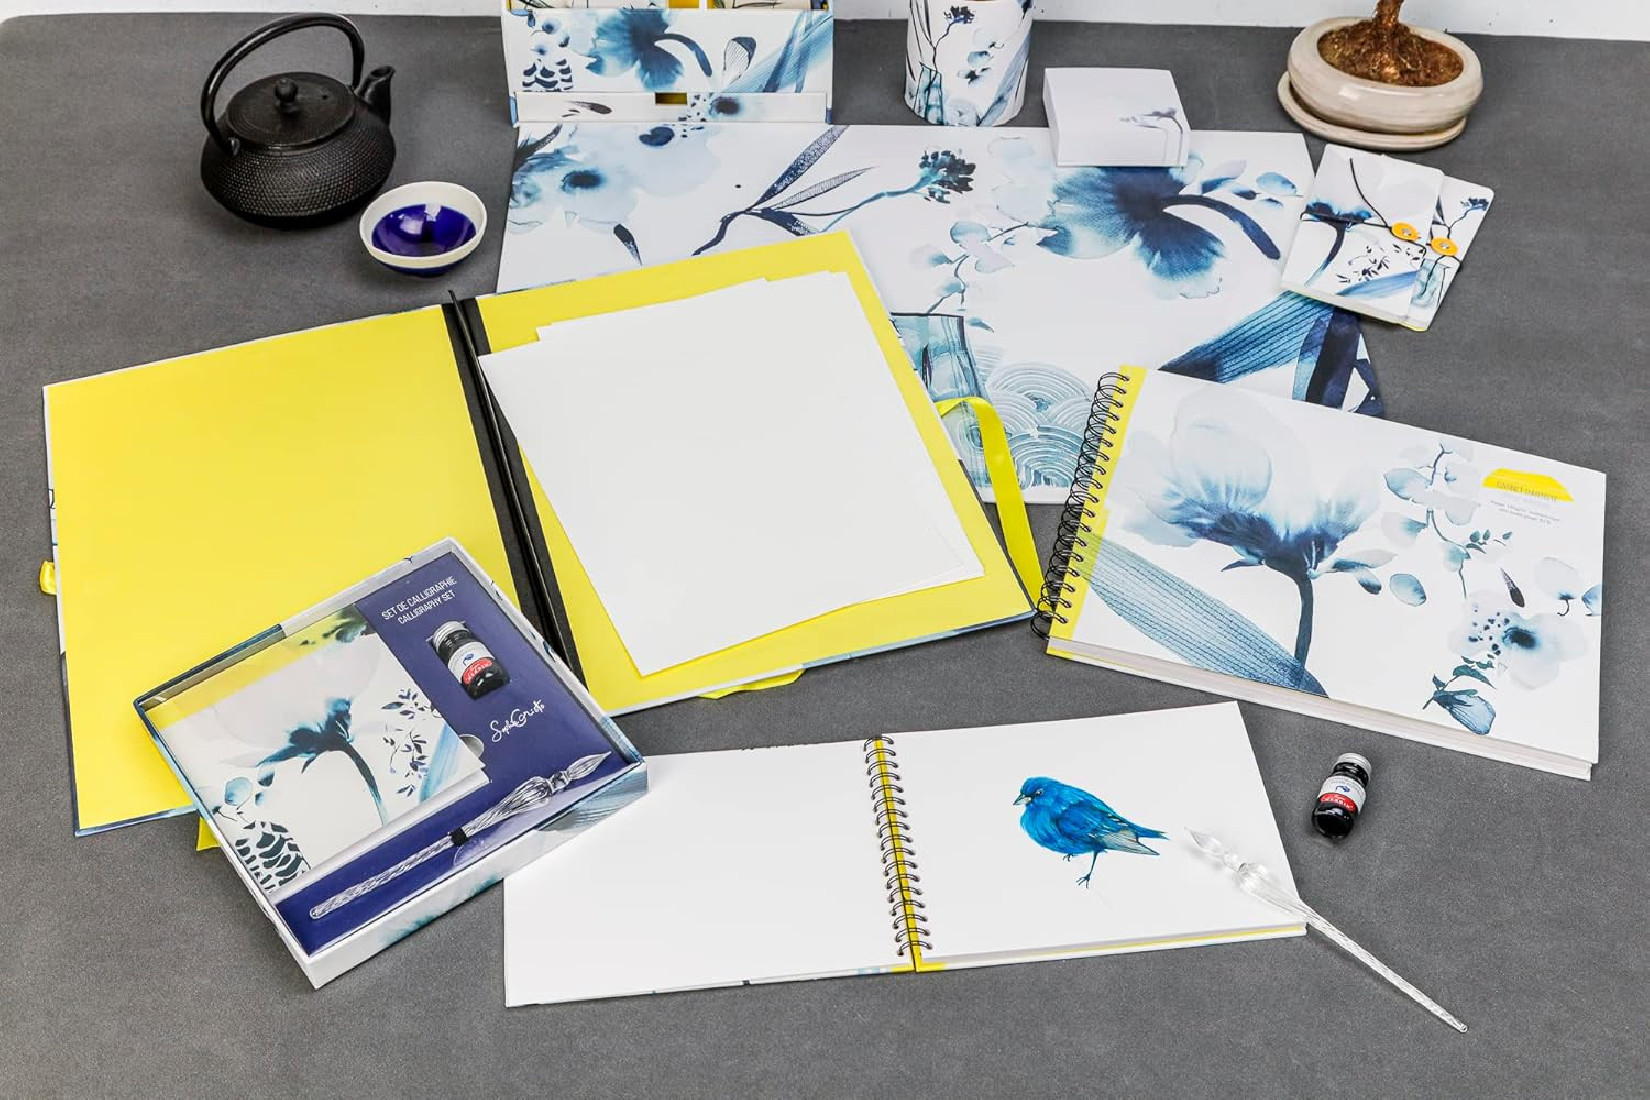 Clairefontaine Rhodia 115947C - A Drawing Board Closure 3 Ribbons 28x38cm - For A4 and 24 x 32 cm Formats - Floral Pattern Painted in Blue Ink - Inkebana Collection